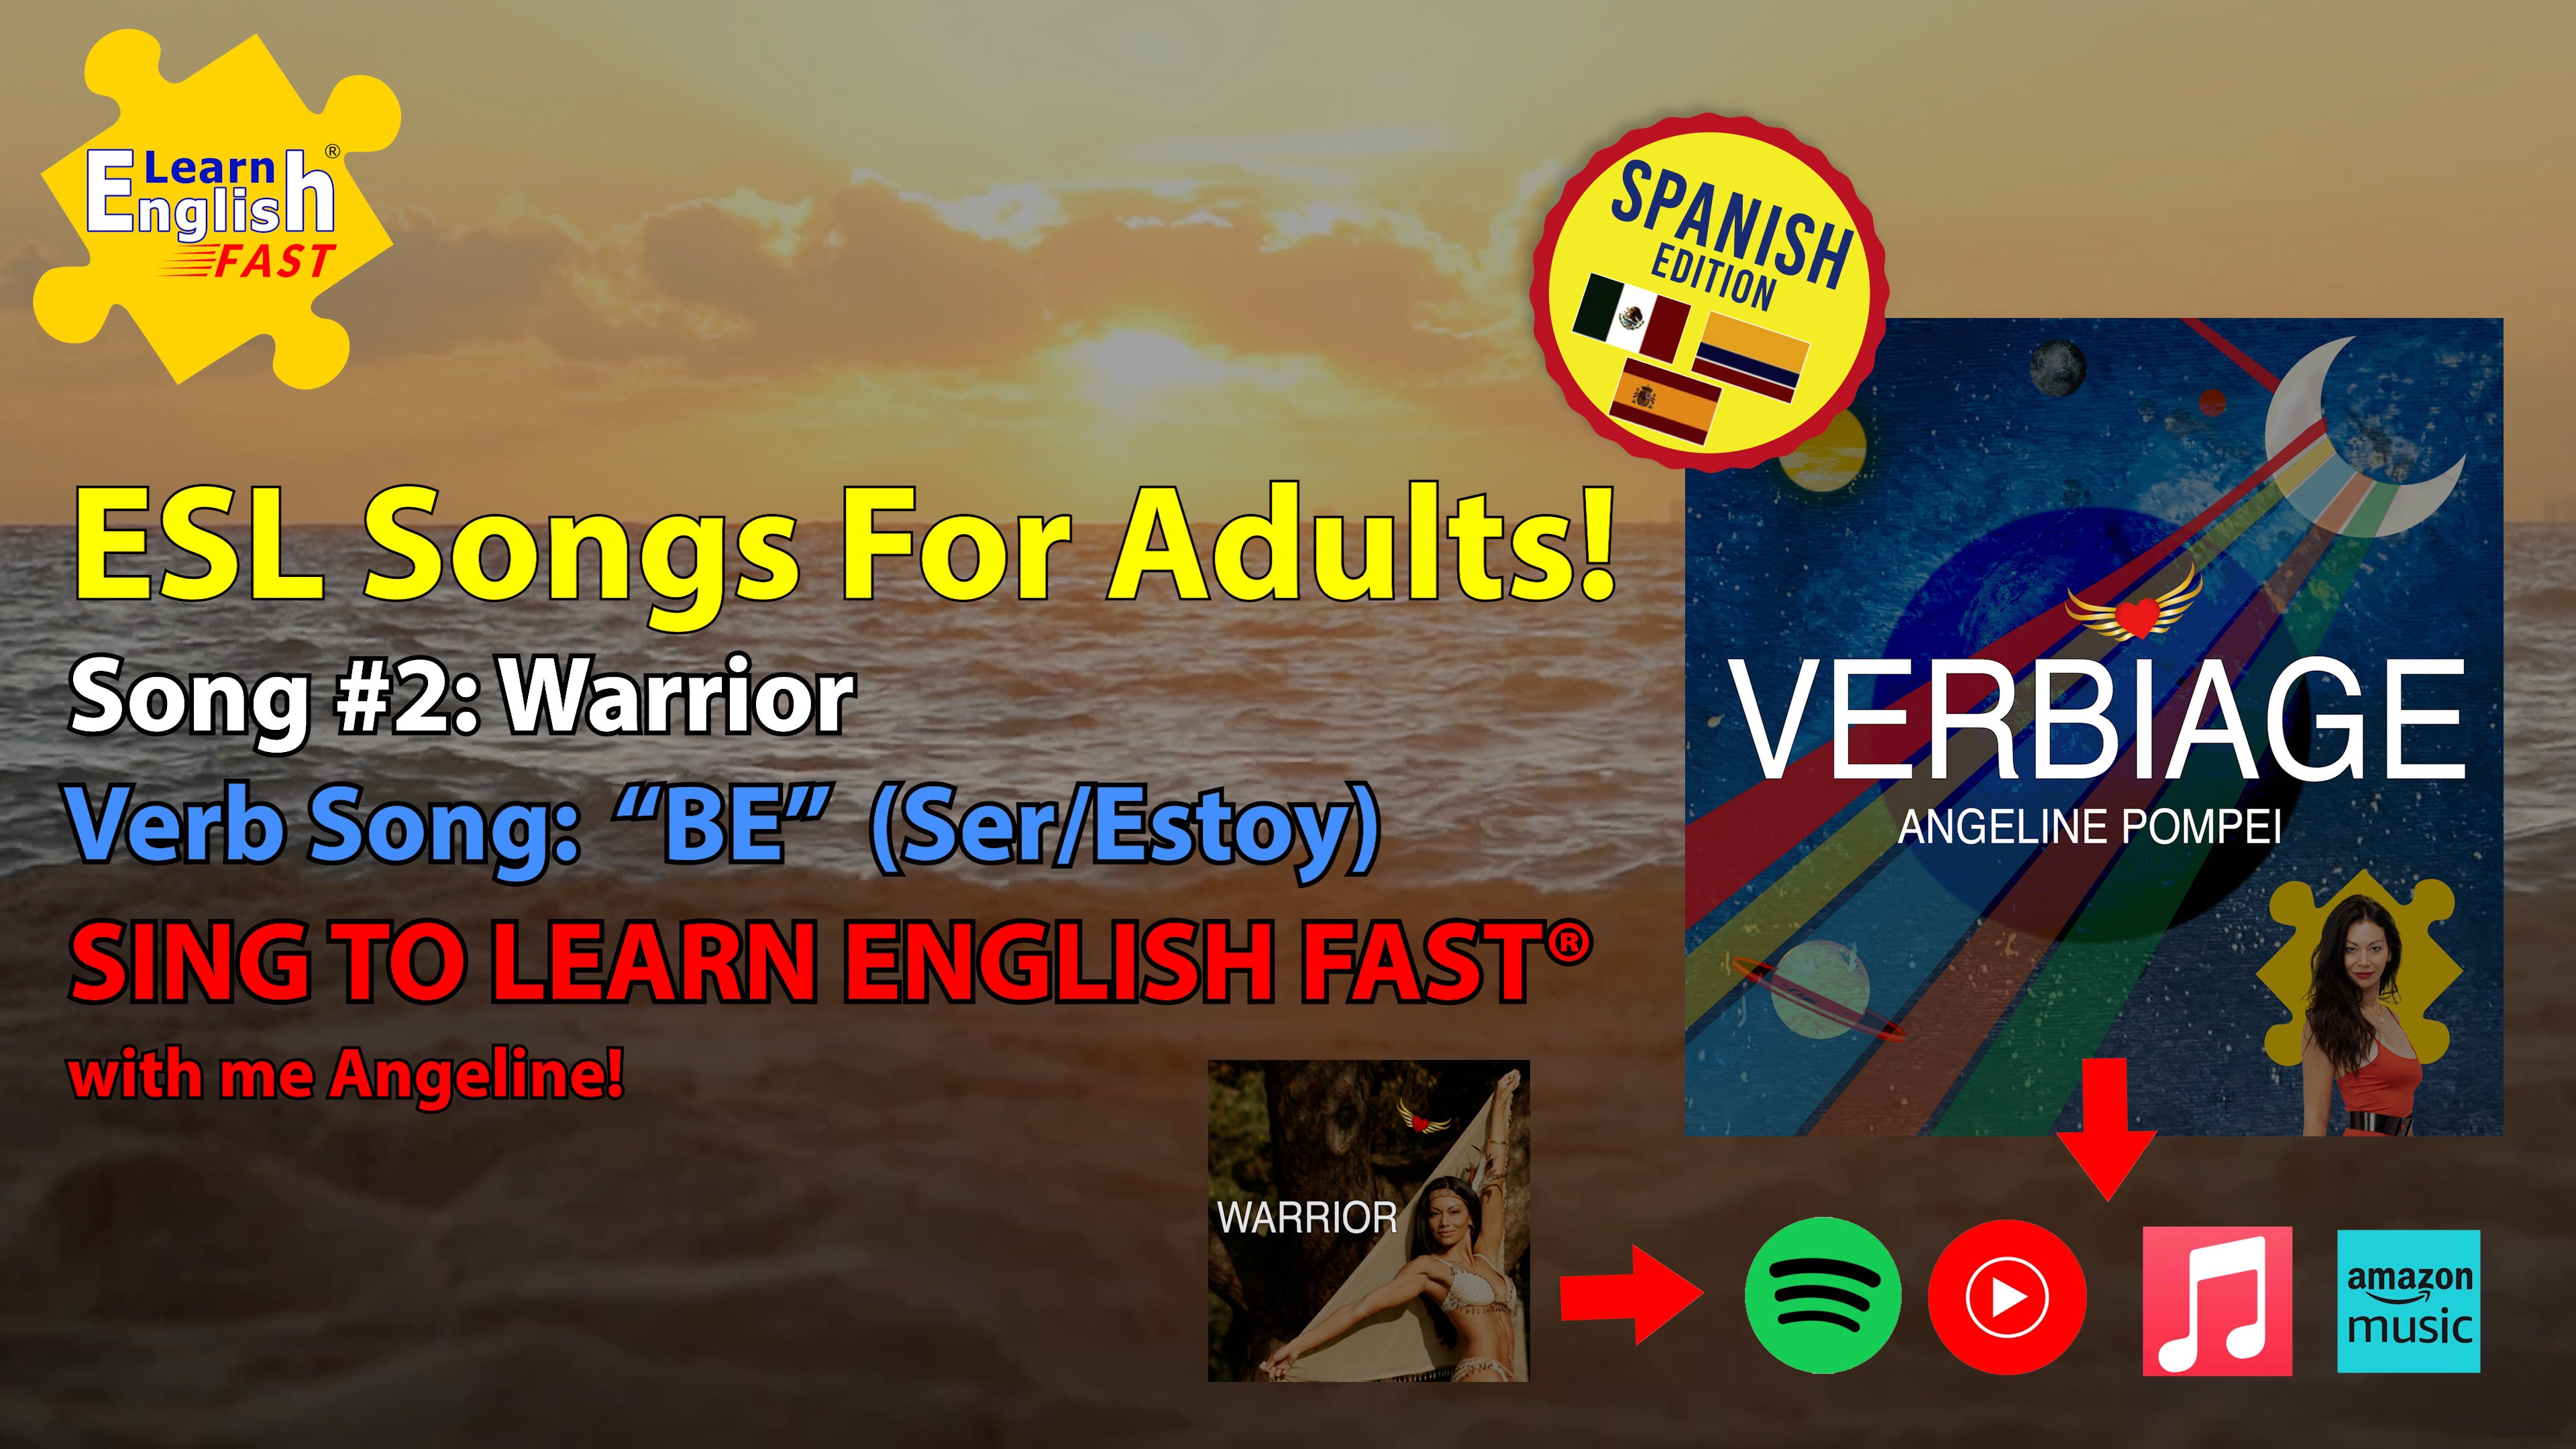 Load video: Verb songs for adults to learn english